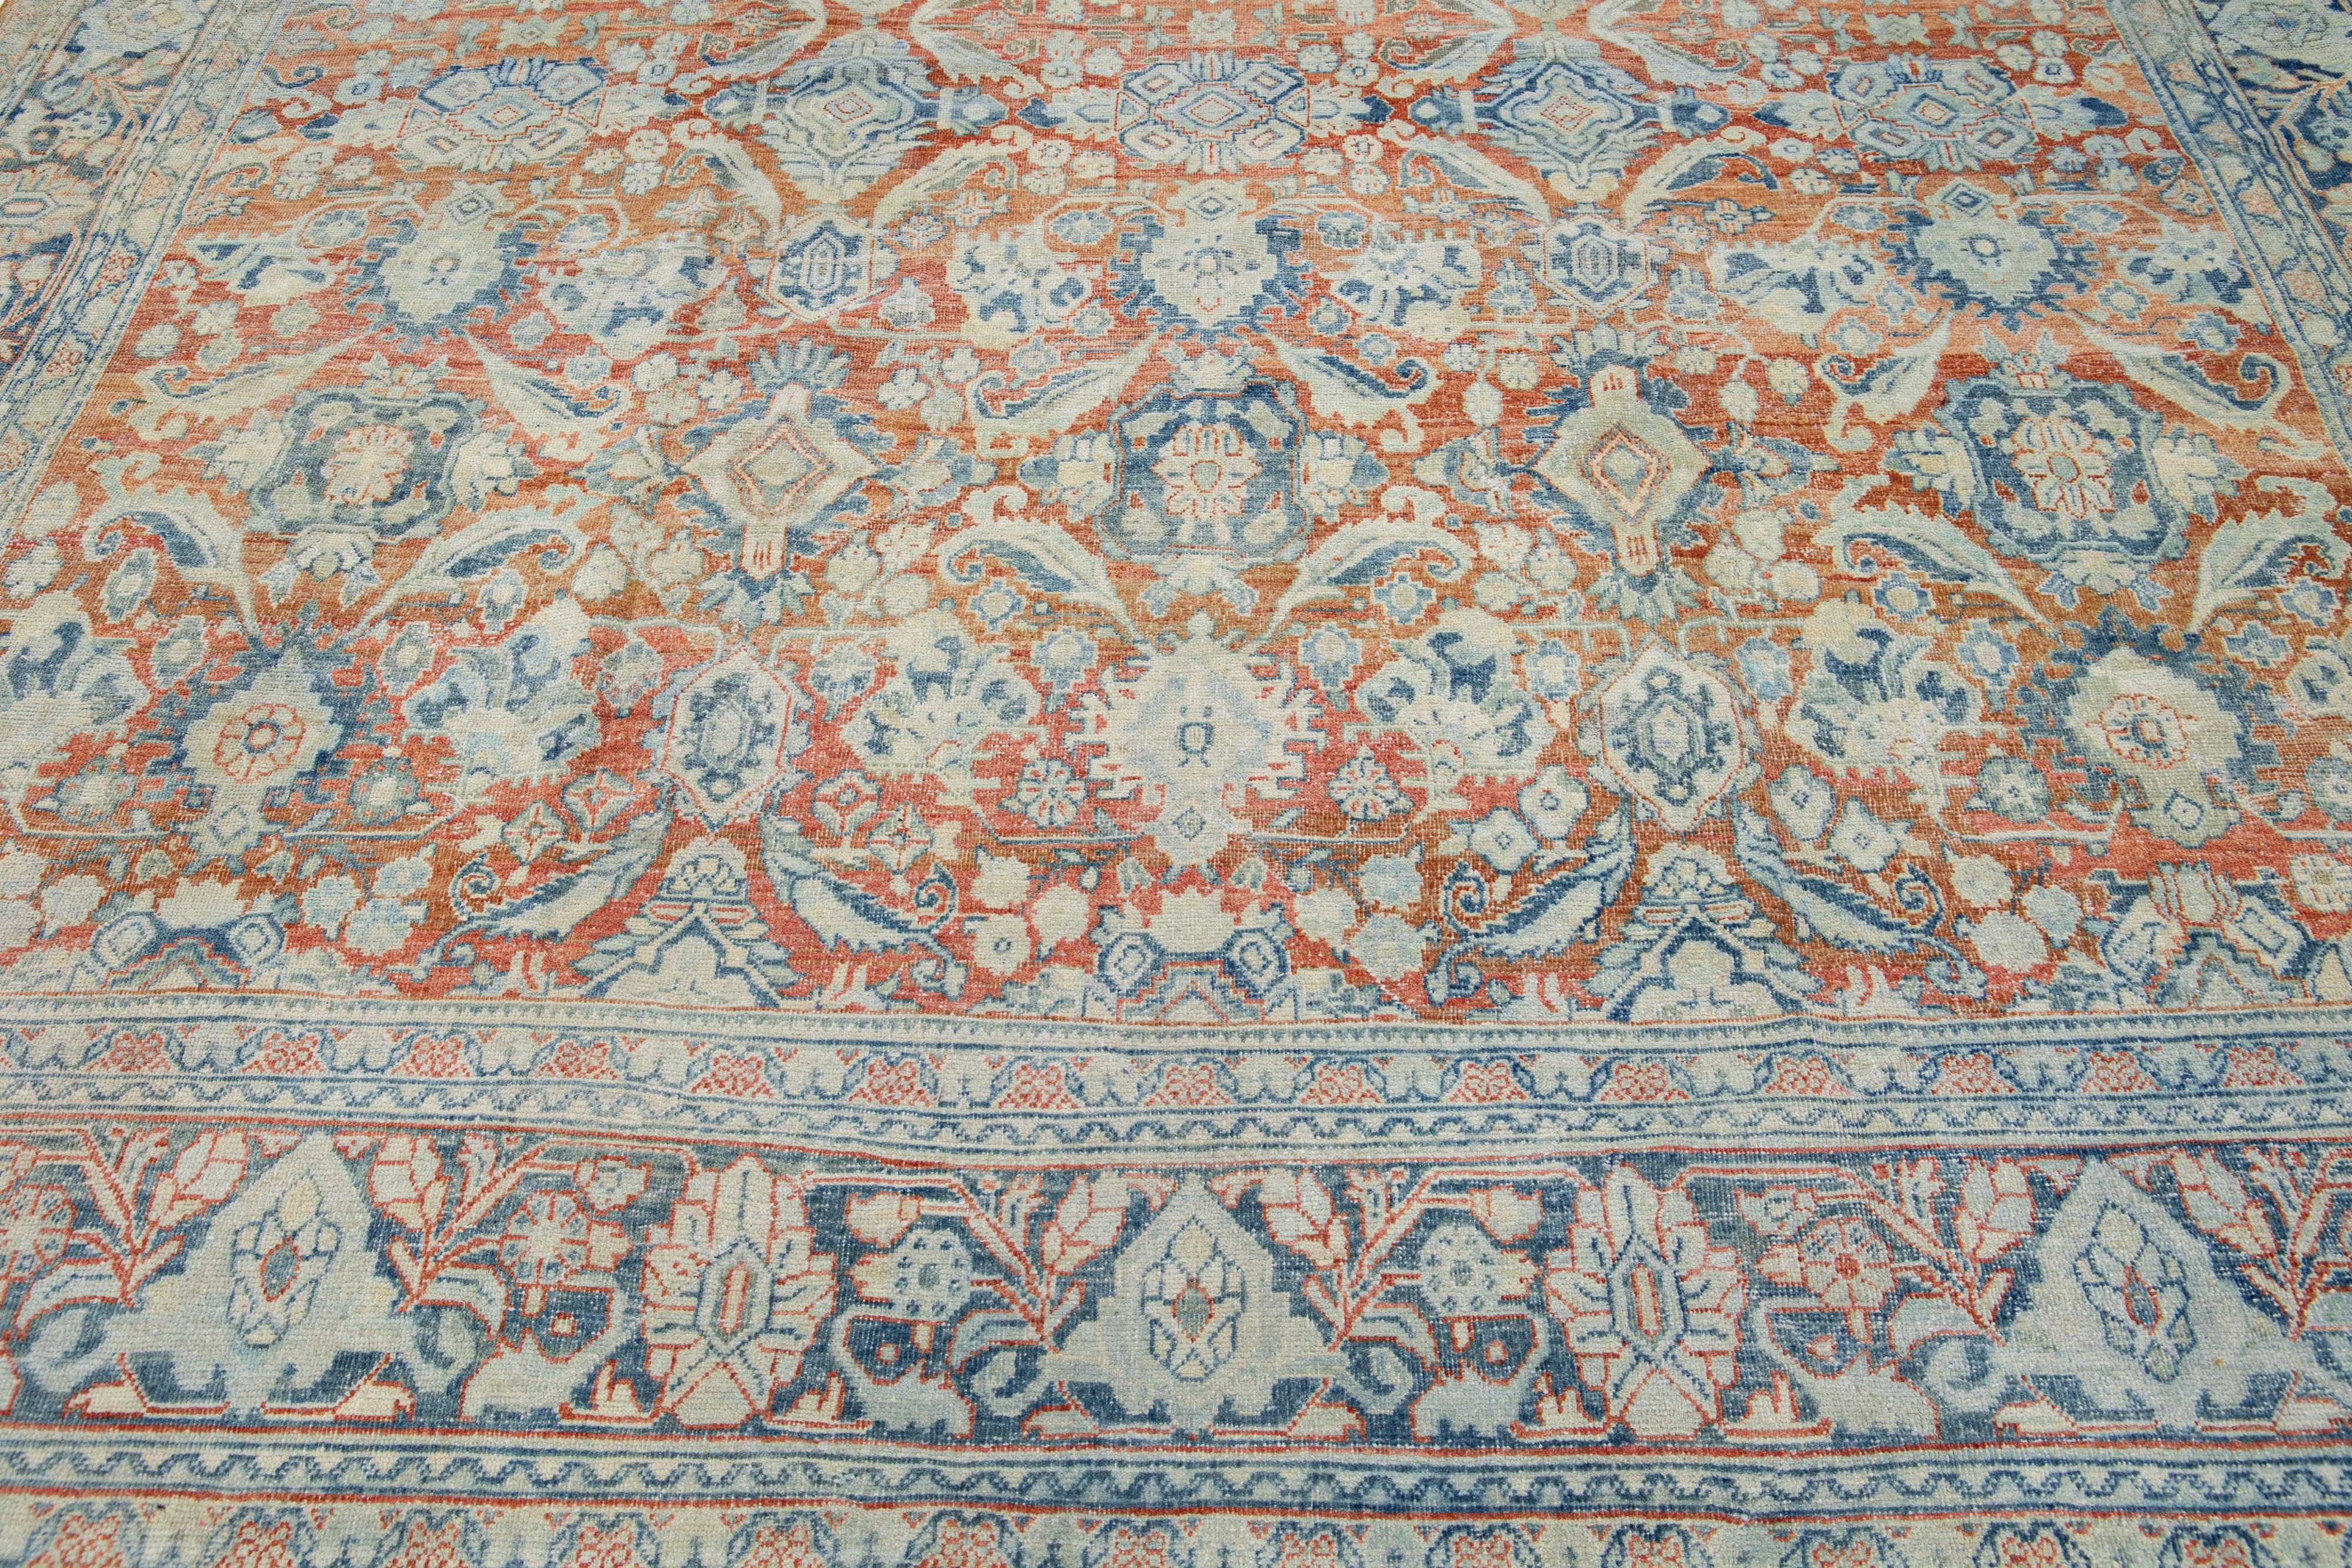 Beautiful hand-knotted antique mahal wool rug with a rust color field. This Persian rug has blue and beige accent colors in an all-over floral pattern. 

This rug measures: 9'6